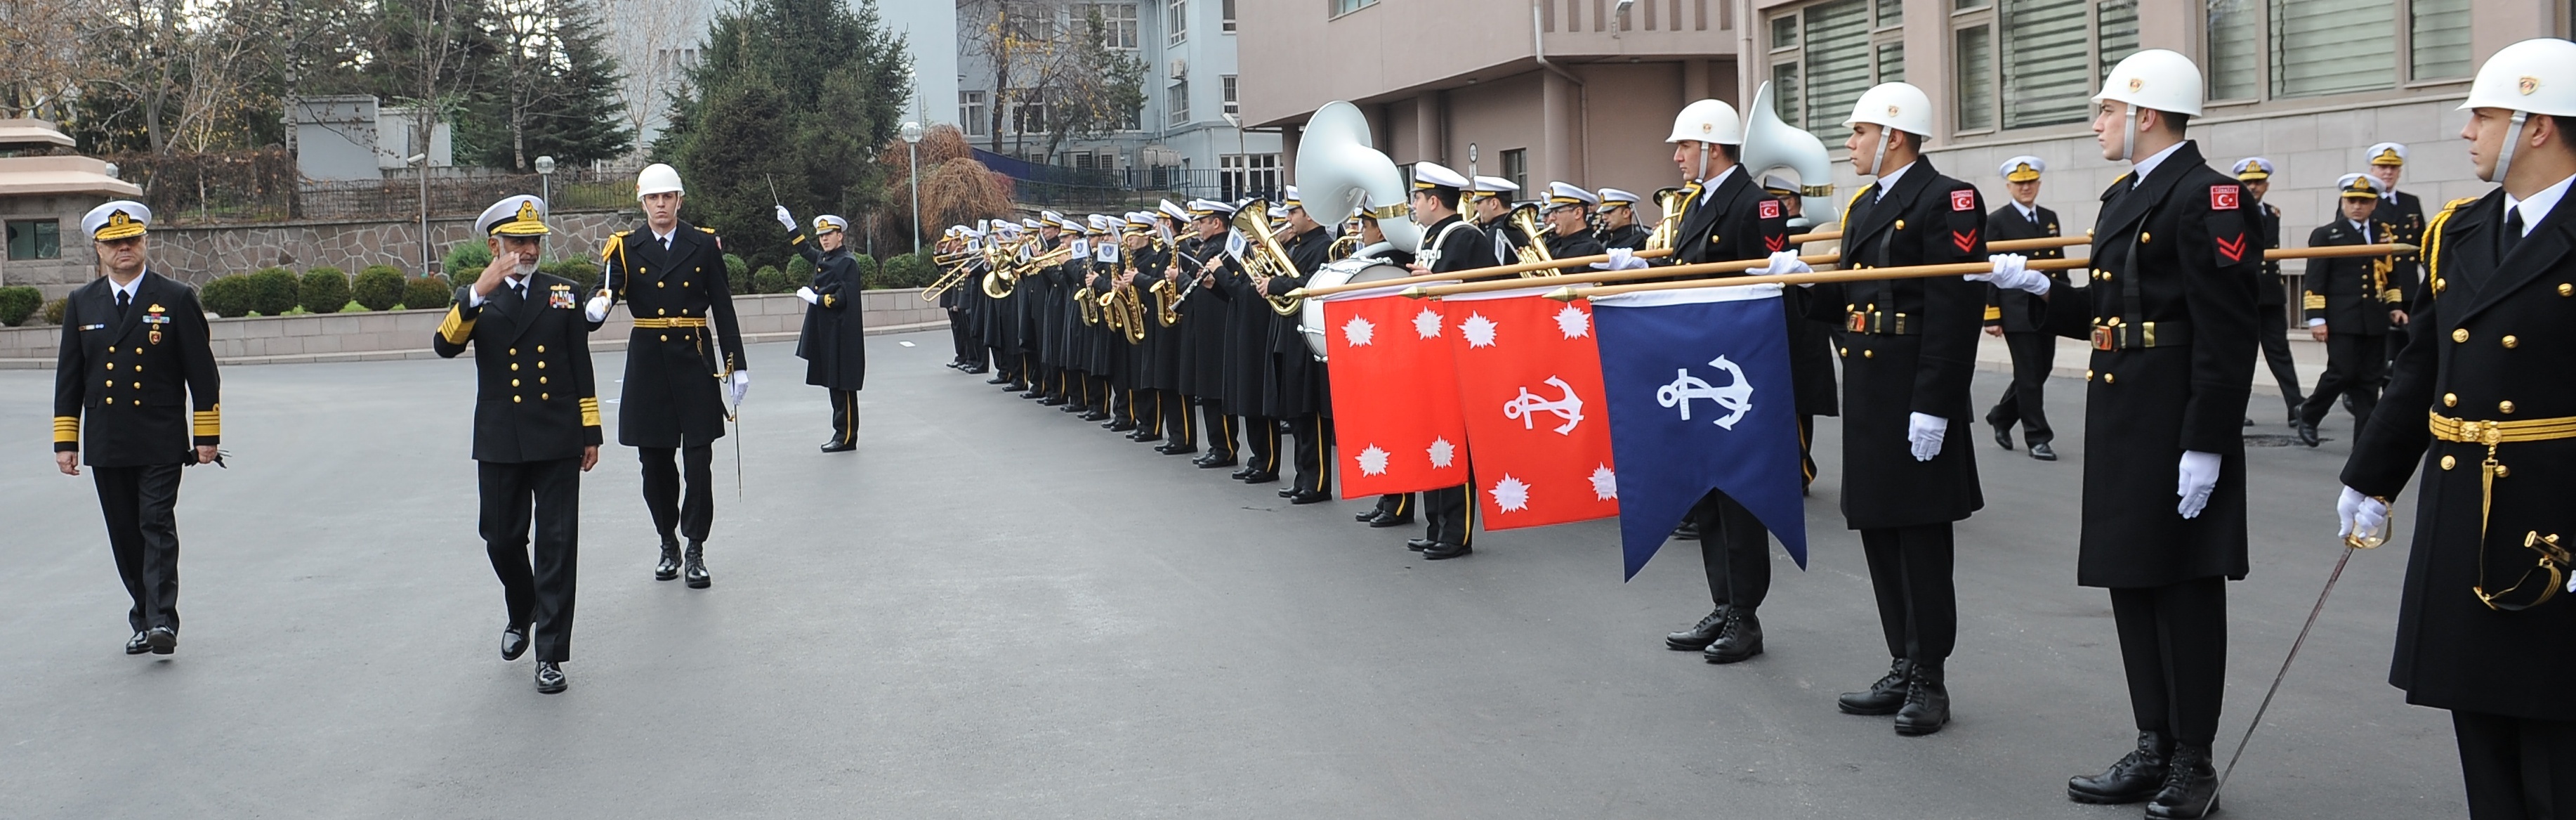 Chief of Naval Staff of Pakistan inspecting guard of honour upon his arrival at Turkish Naval Forces Headquarters at Ankara